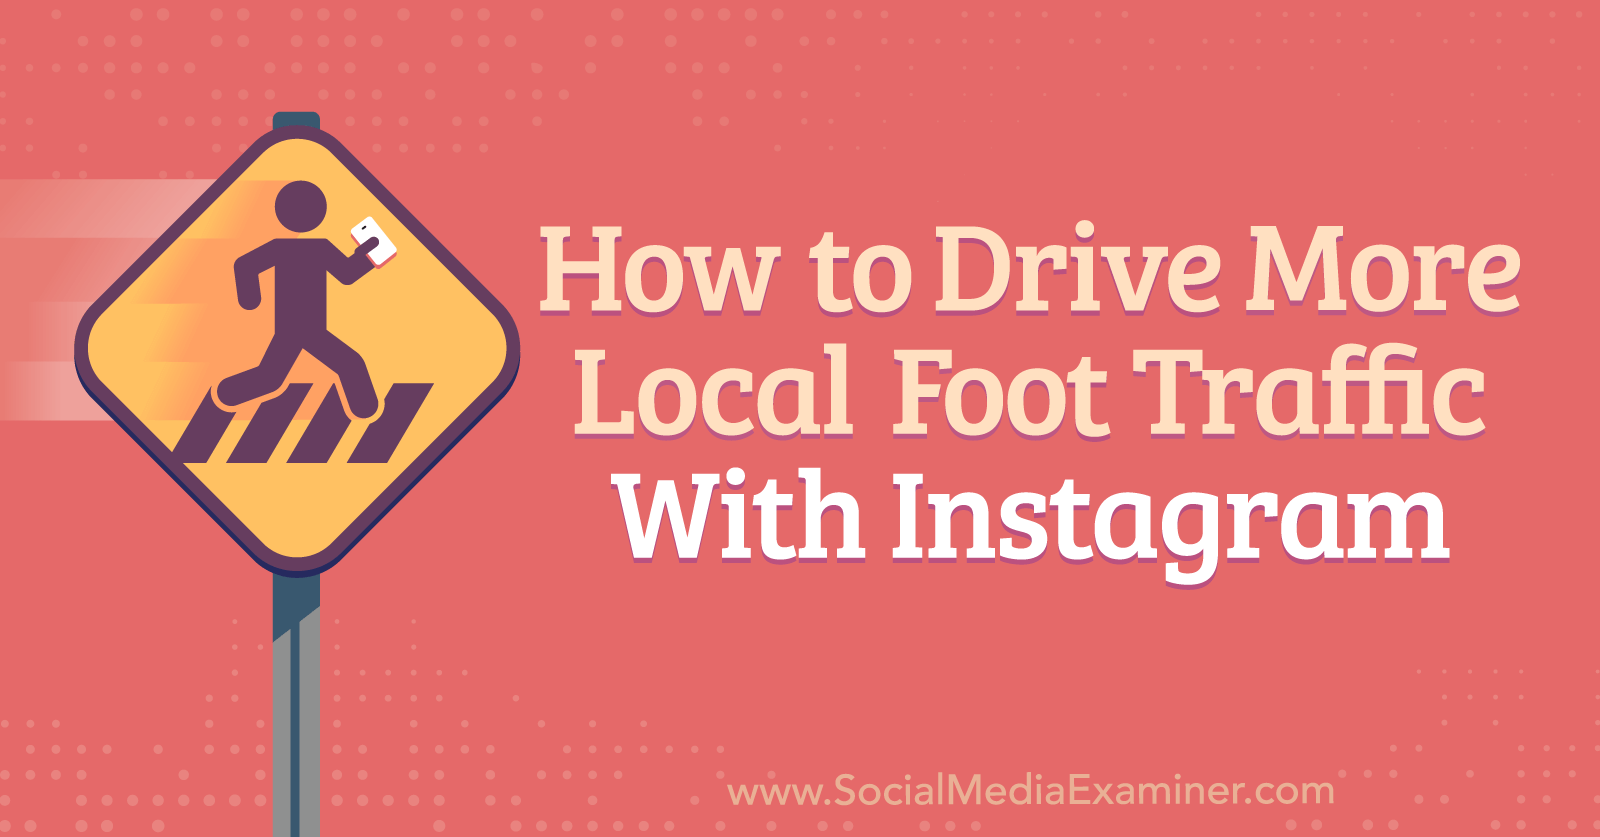 How to Drive More Local Foot Traffic With Instagram by Social Media Examiner